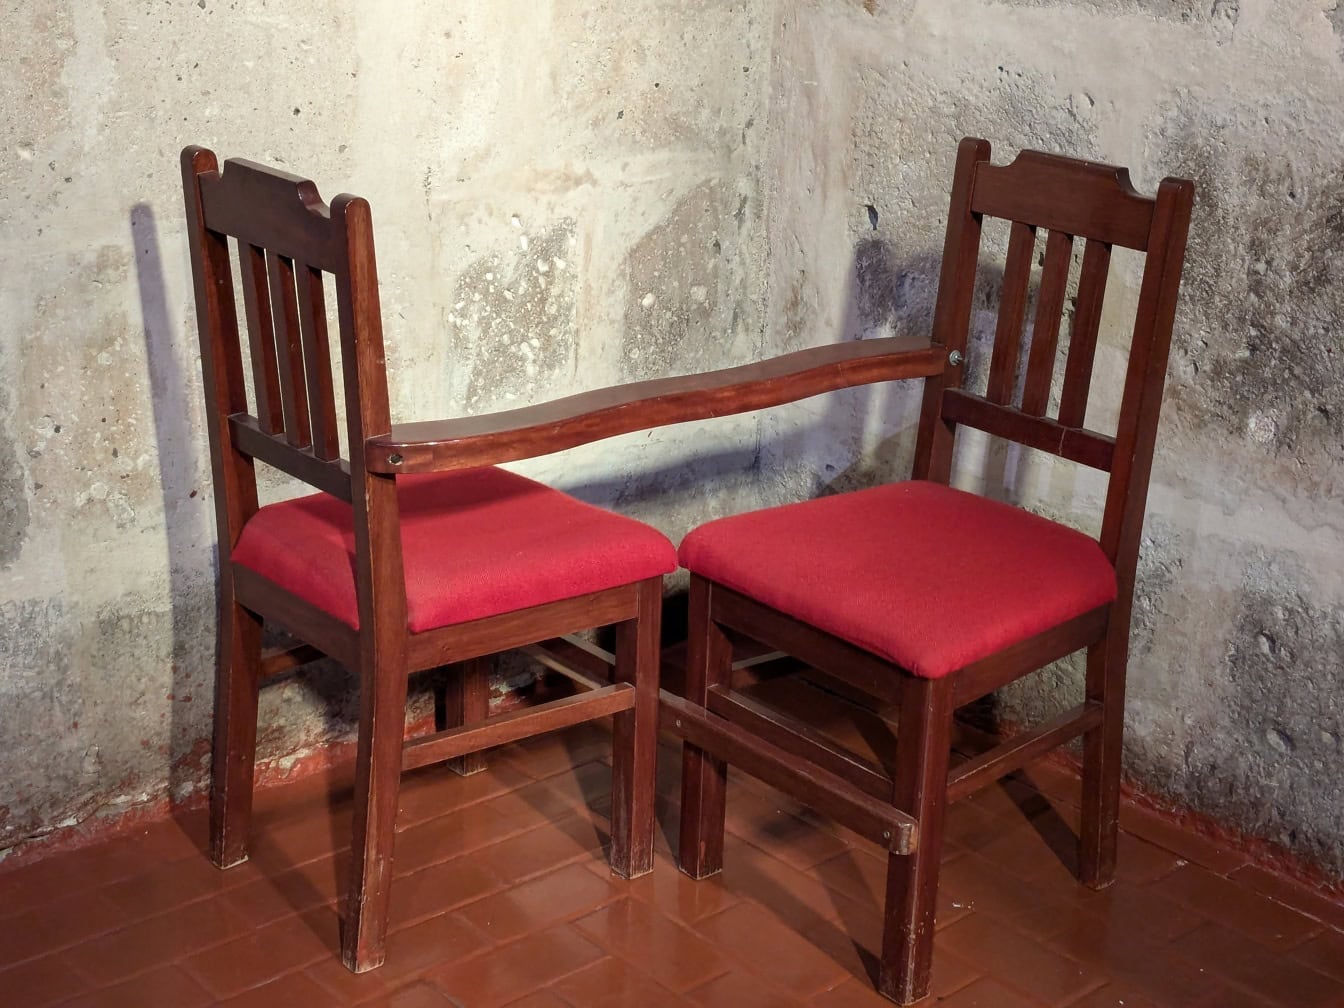 Two connected wooden chairs with red cushions, which are used for religious purposes in the corner of the Catholic Church